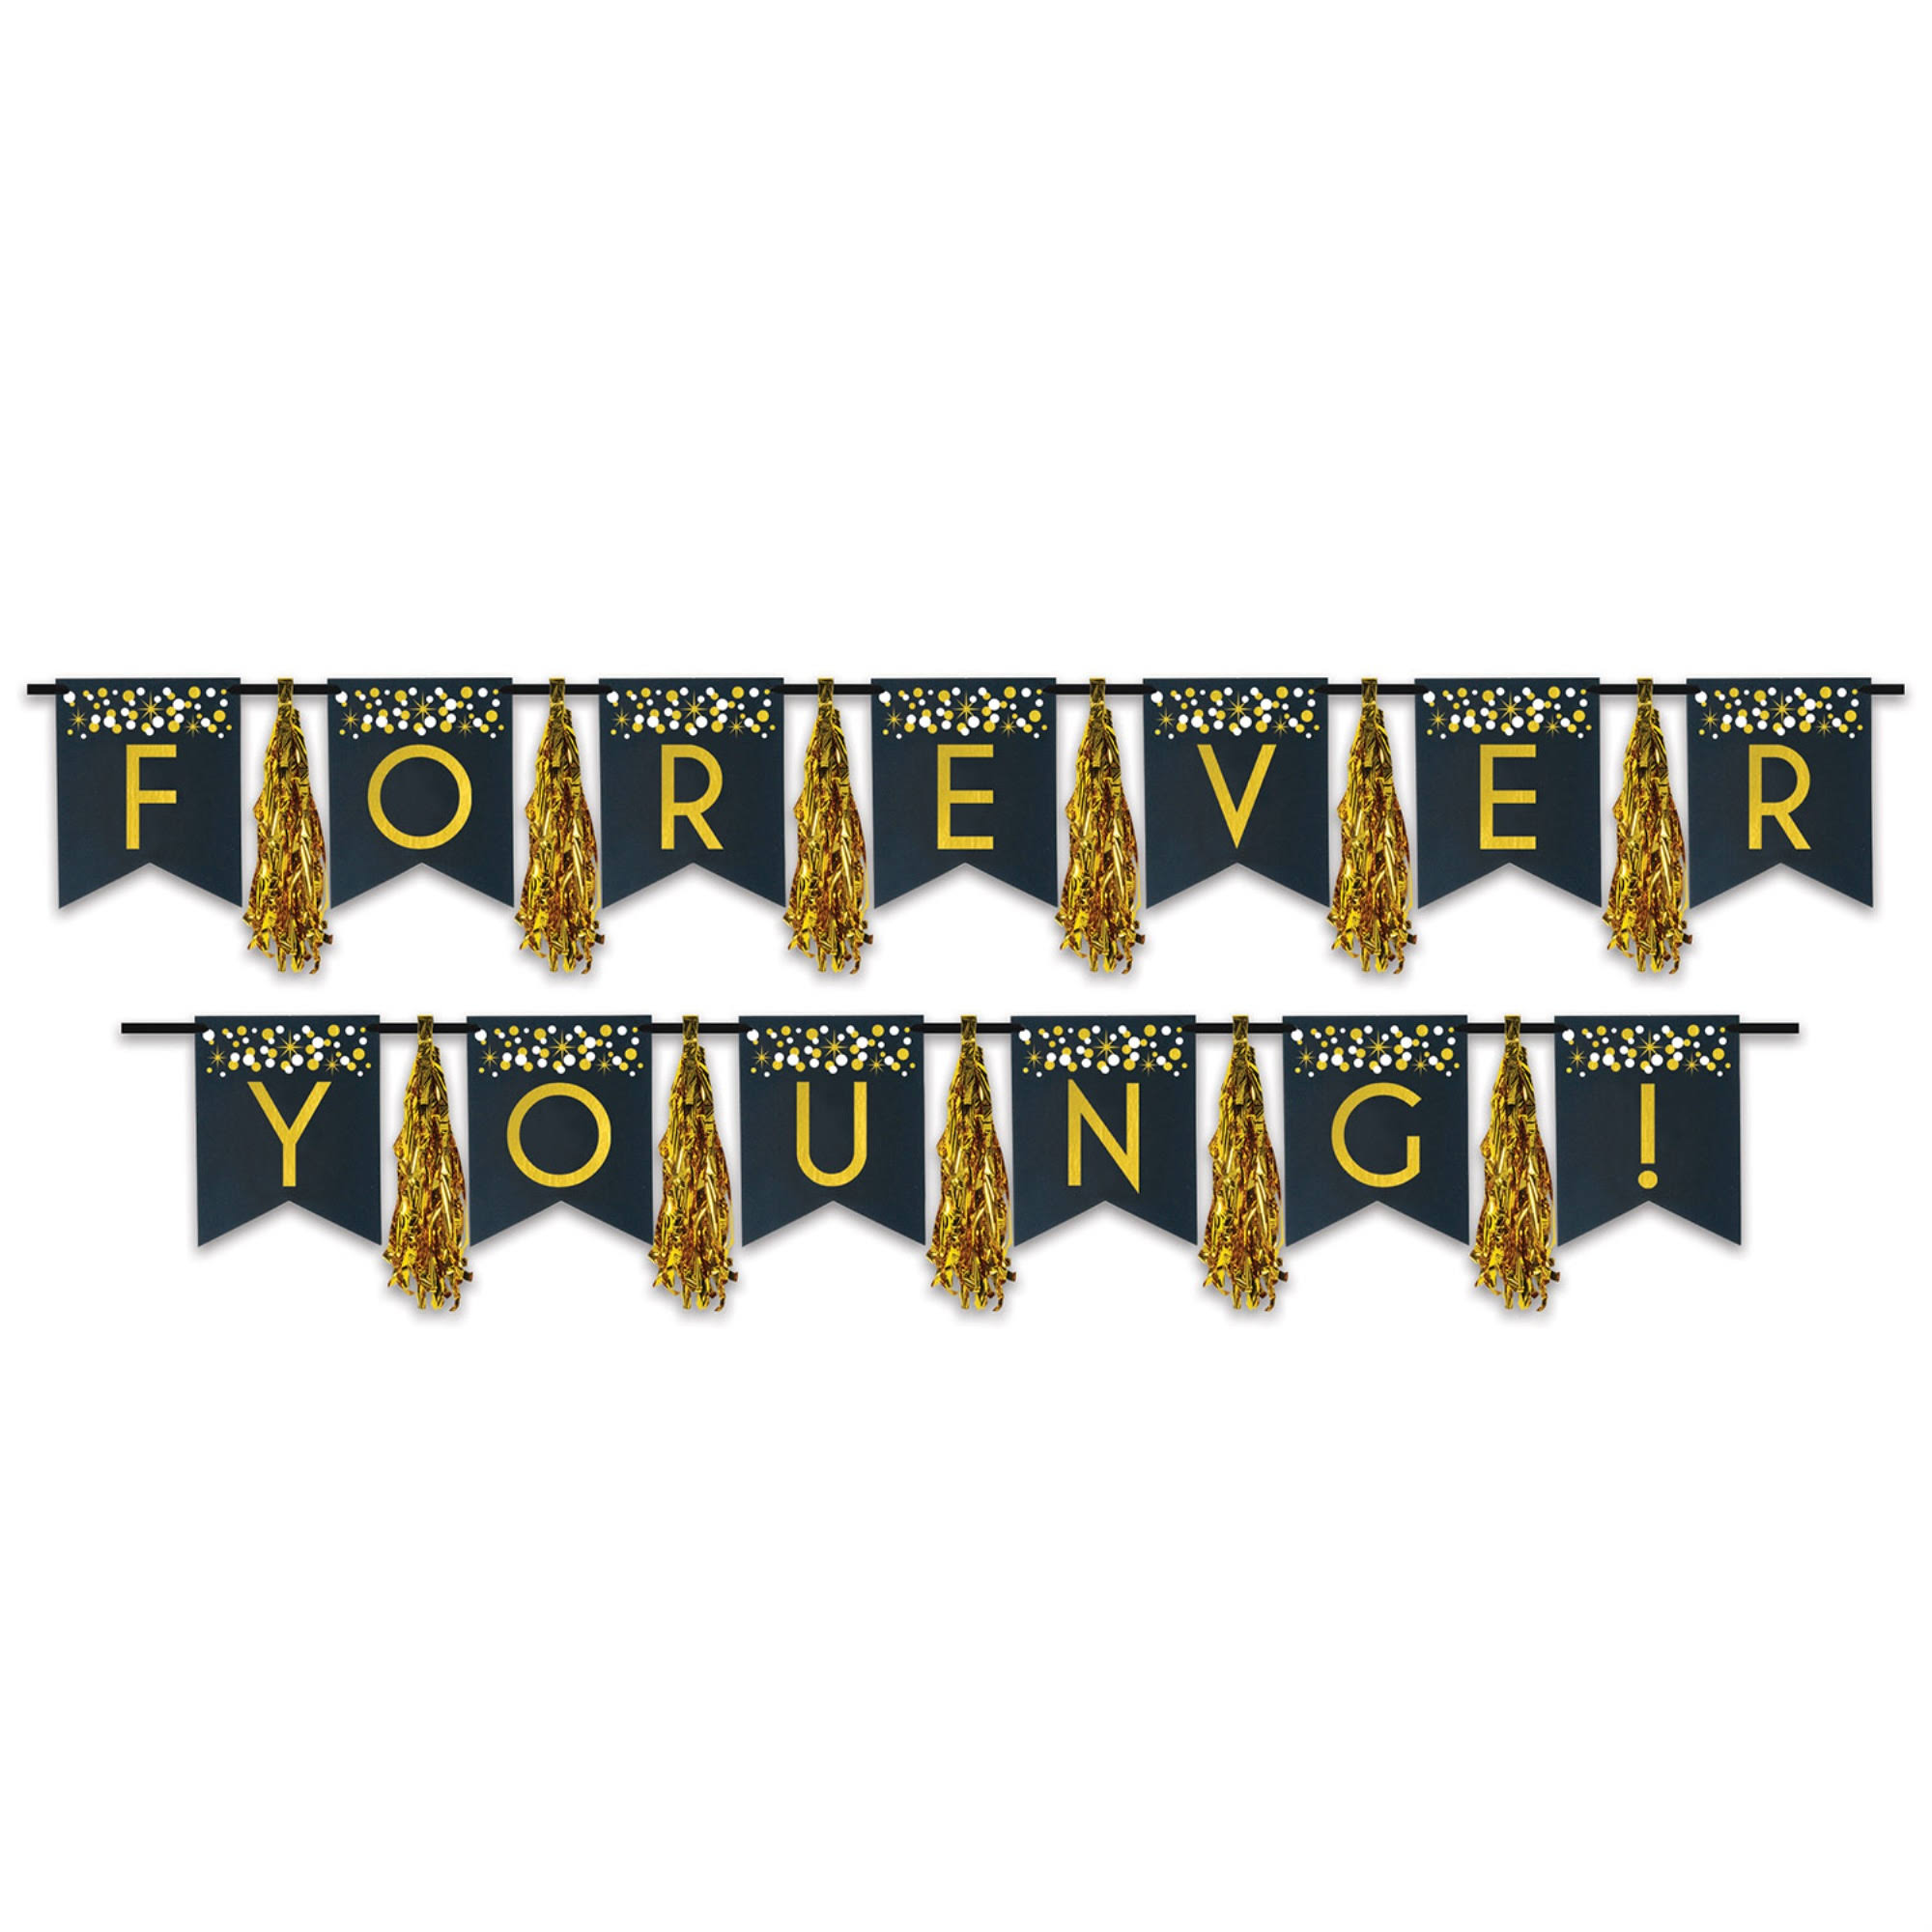 Beistle Forever Young! Tassel Streamer One Size